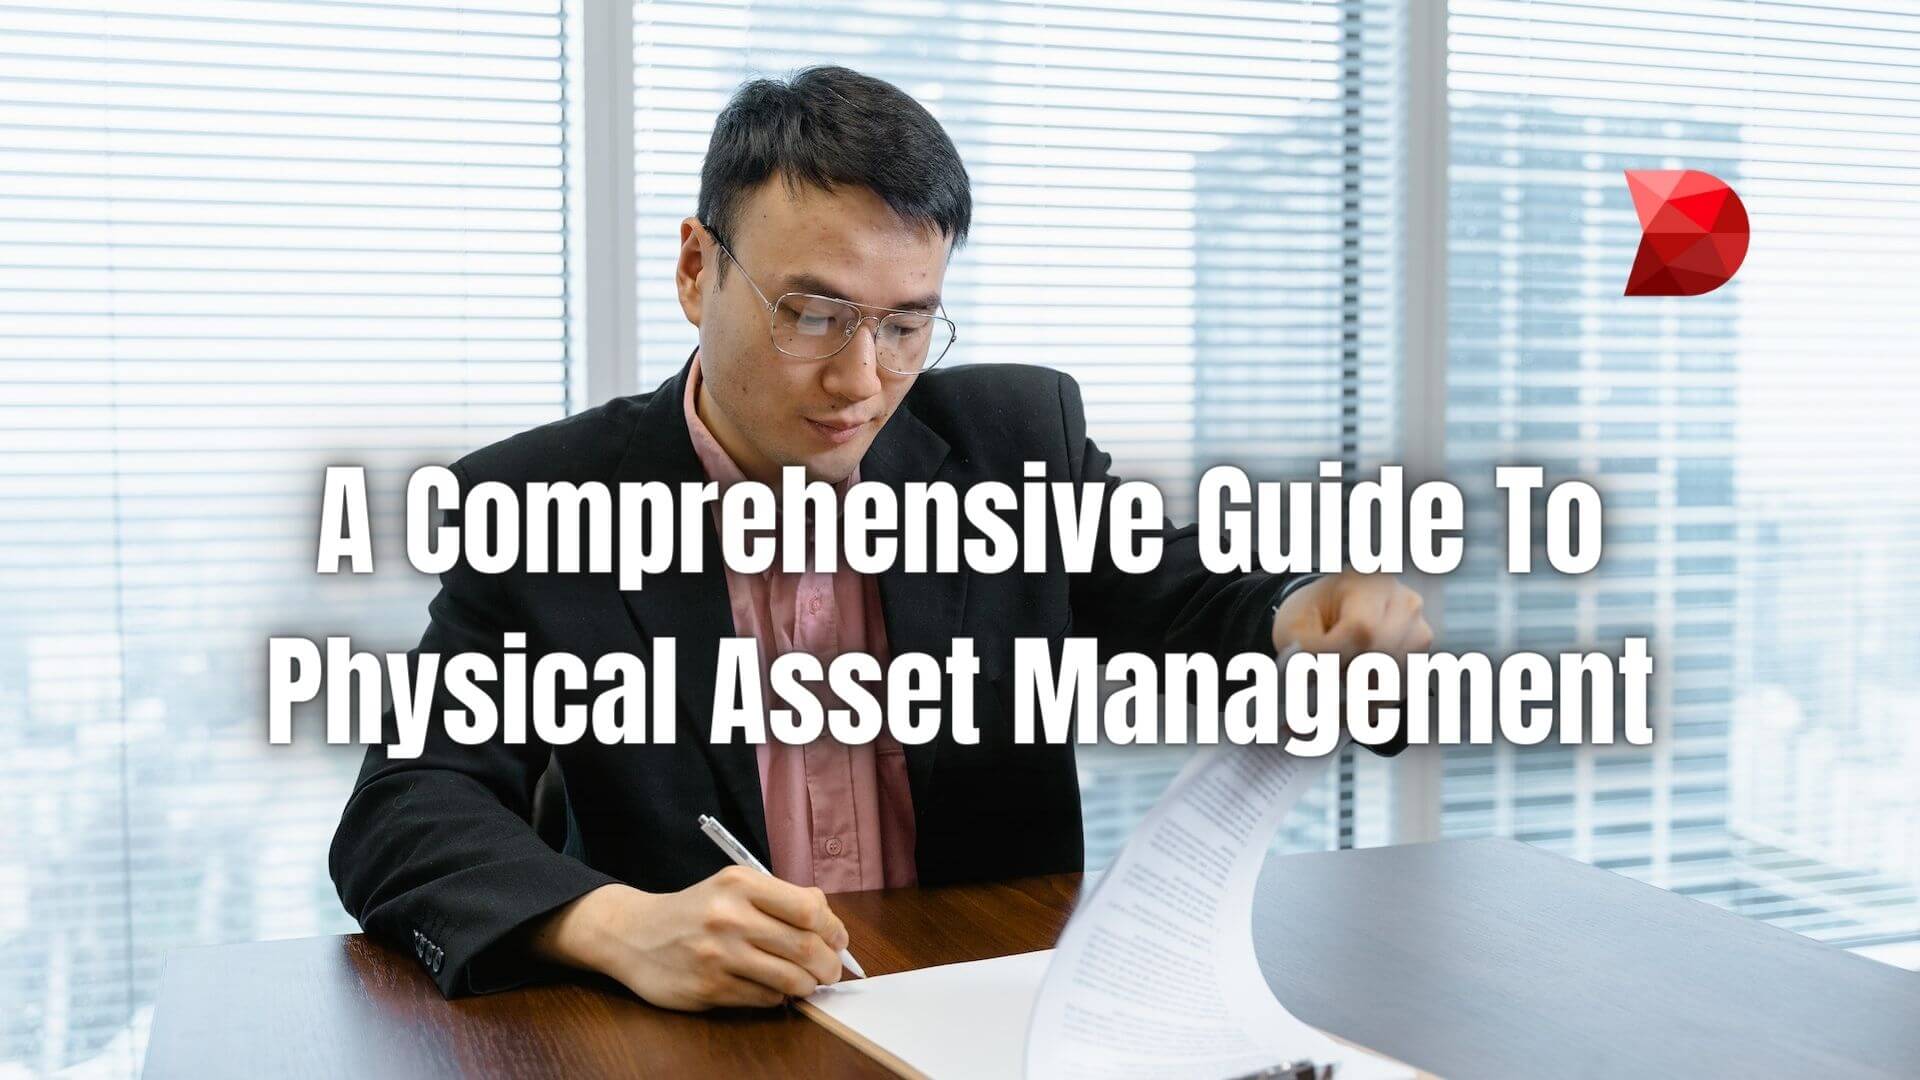 Physical asset management is an important part of any business, as it involves tracking and managing a company's physical assets. Learn more!